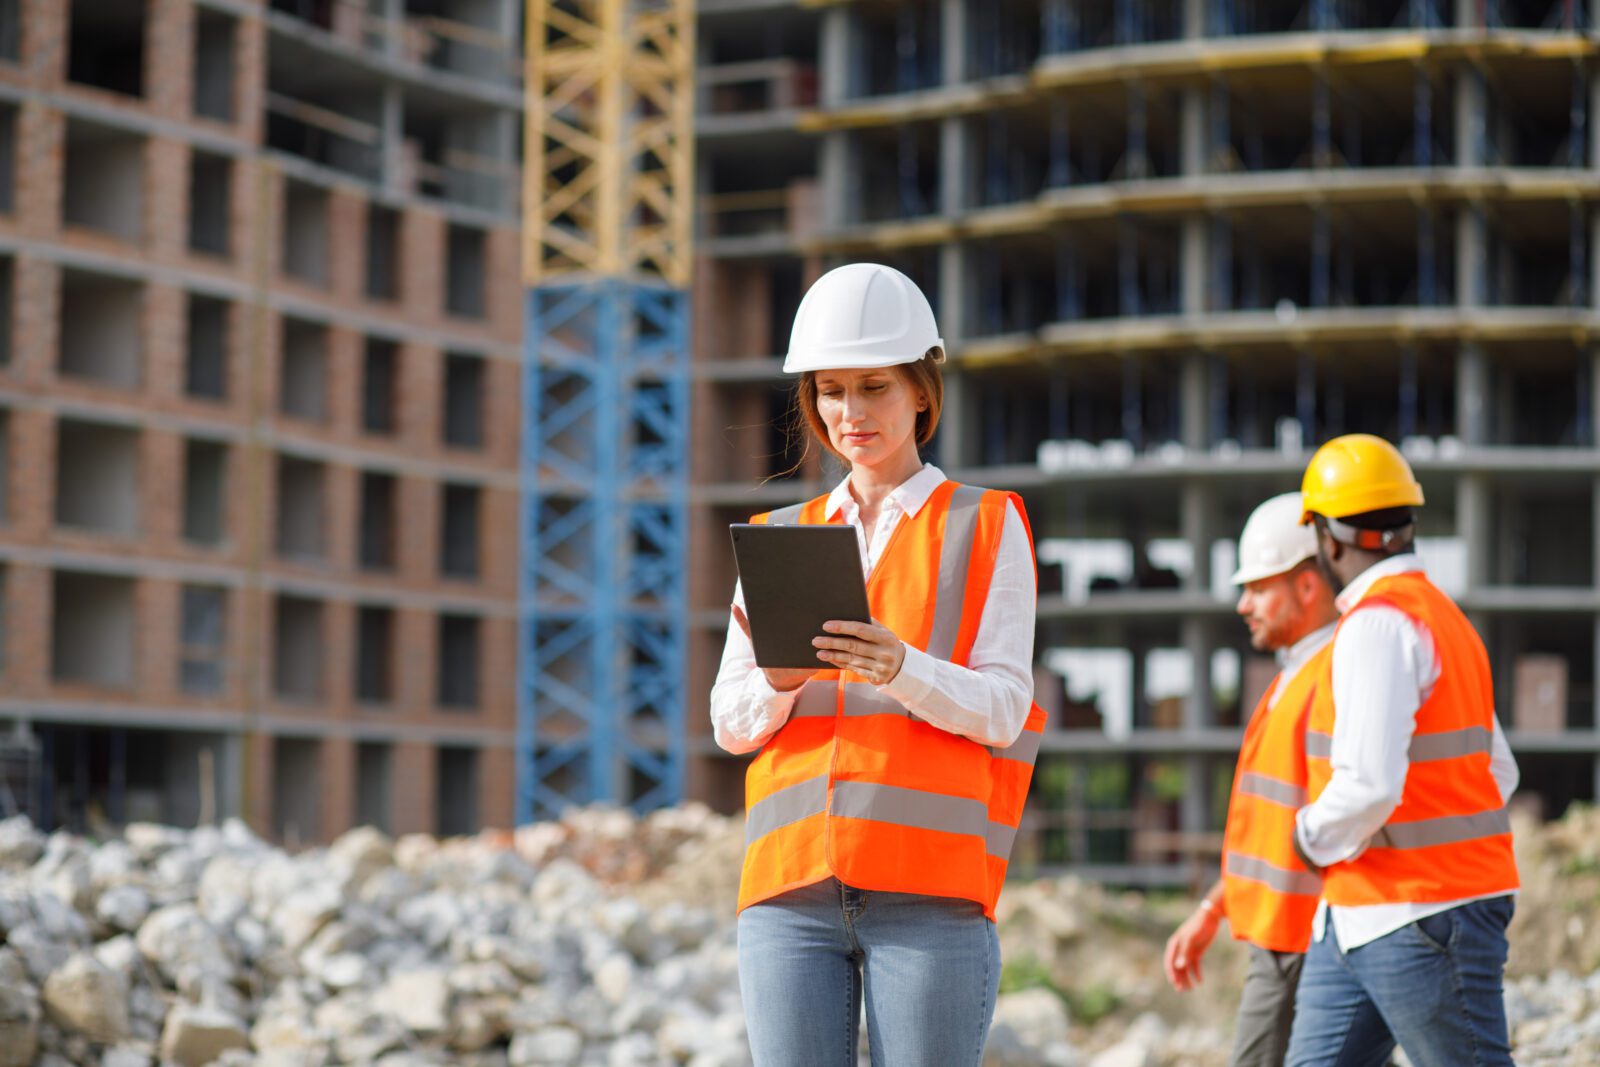 Female construction worker wearing safety wear looking at tablet with construction site behind her